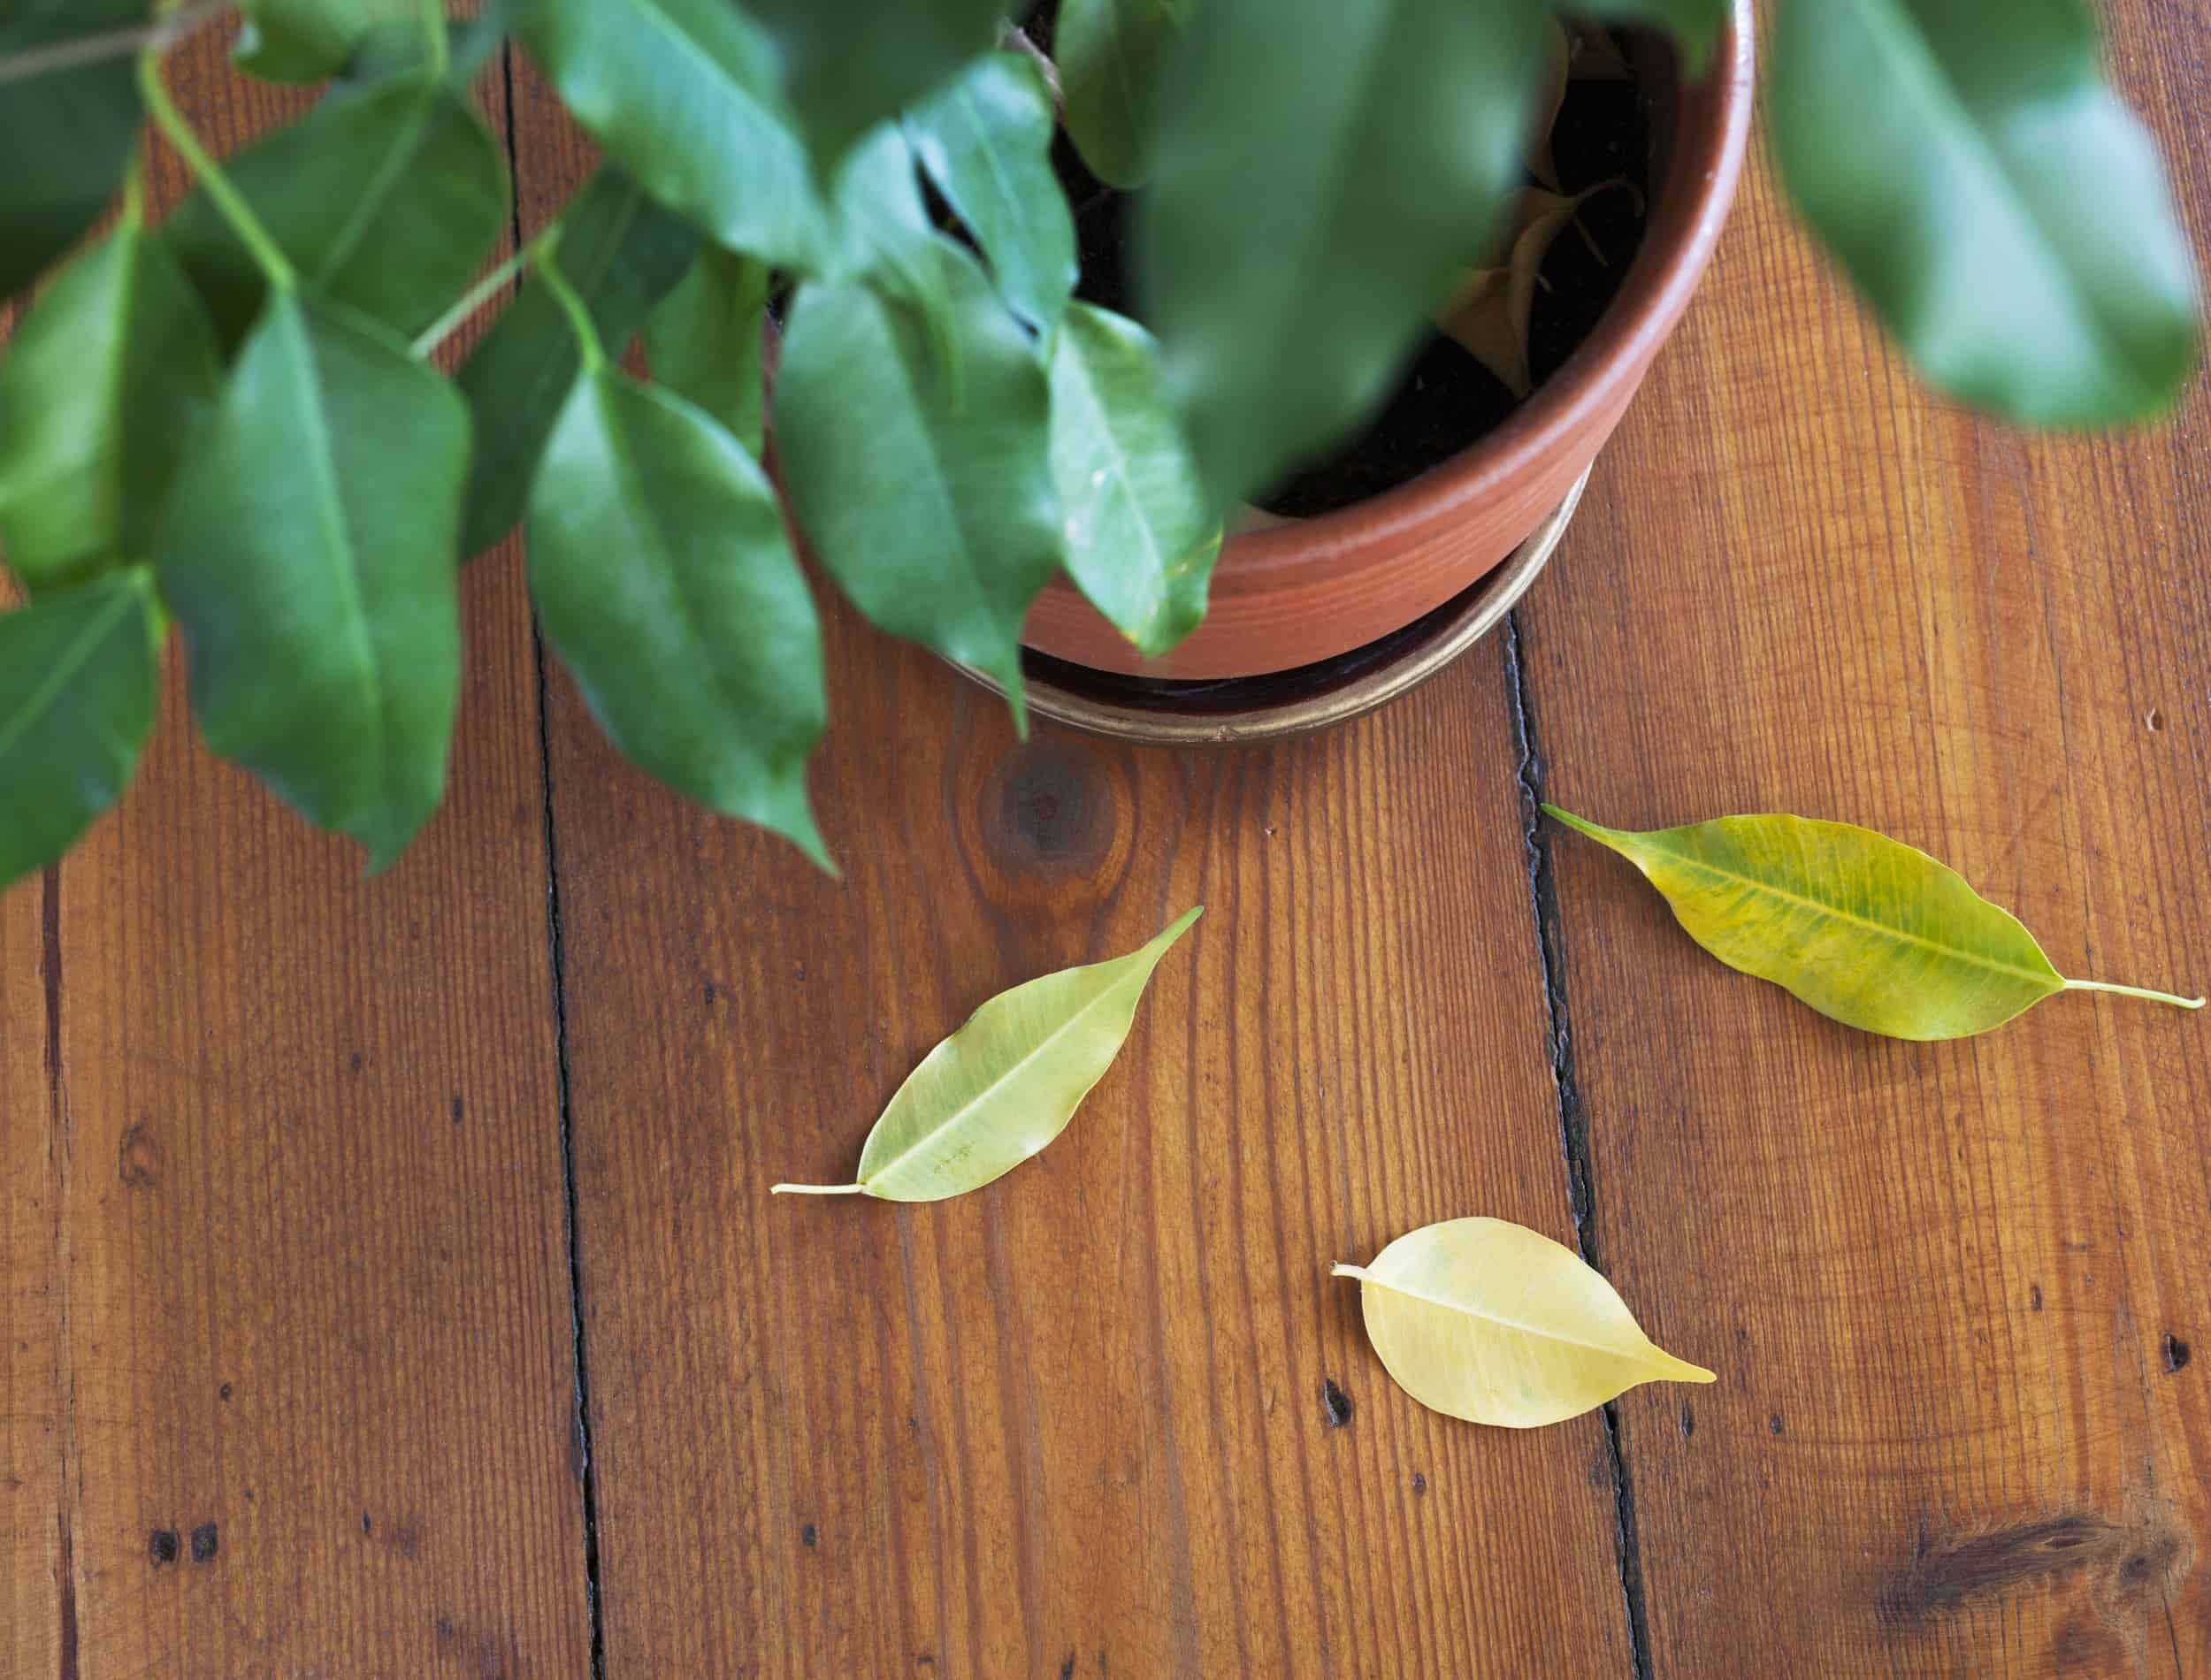 Overhead photo of indoor plant dropping yellow leaves on wooden floor. Taking care of houseplants concept.